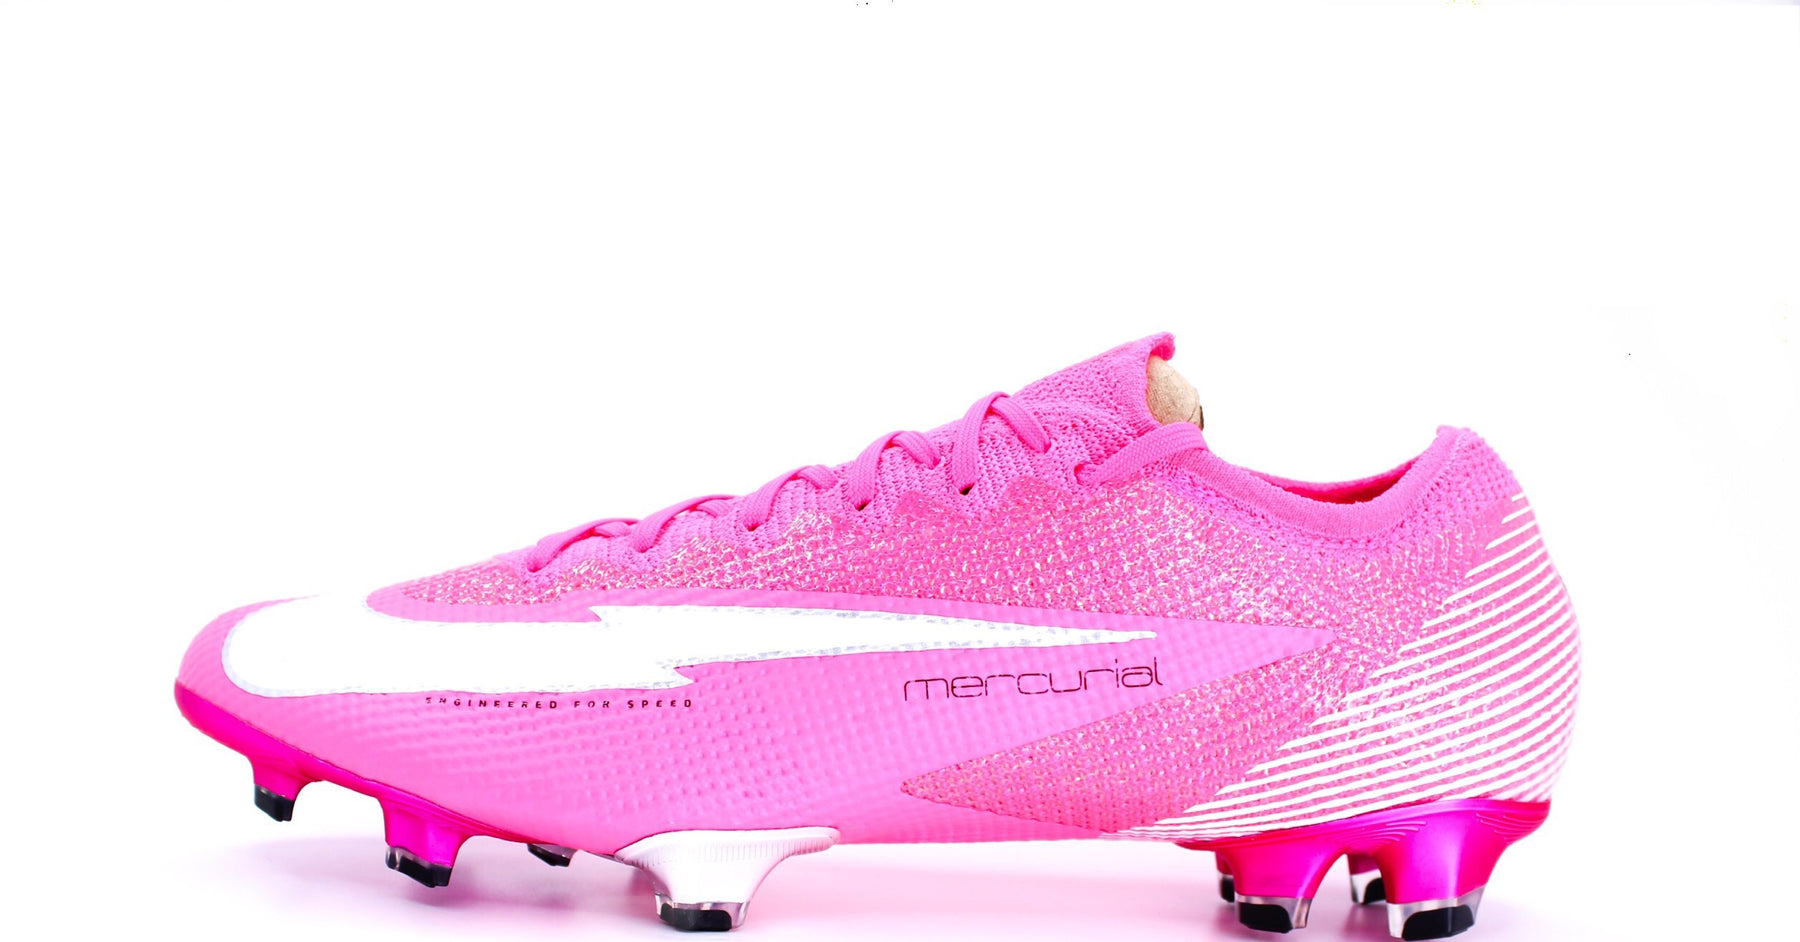 Nike Mercurial Vapor 13 Mbappe Special Edition Pink Blast/White/Black –  Retro Soccer Cleats